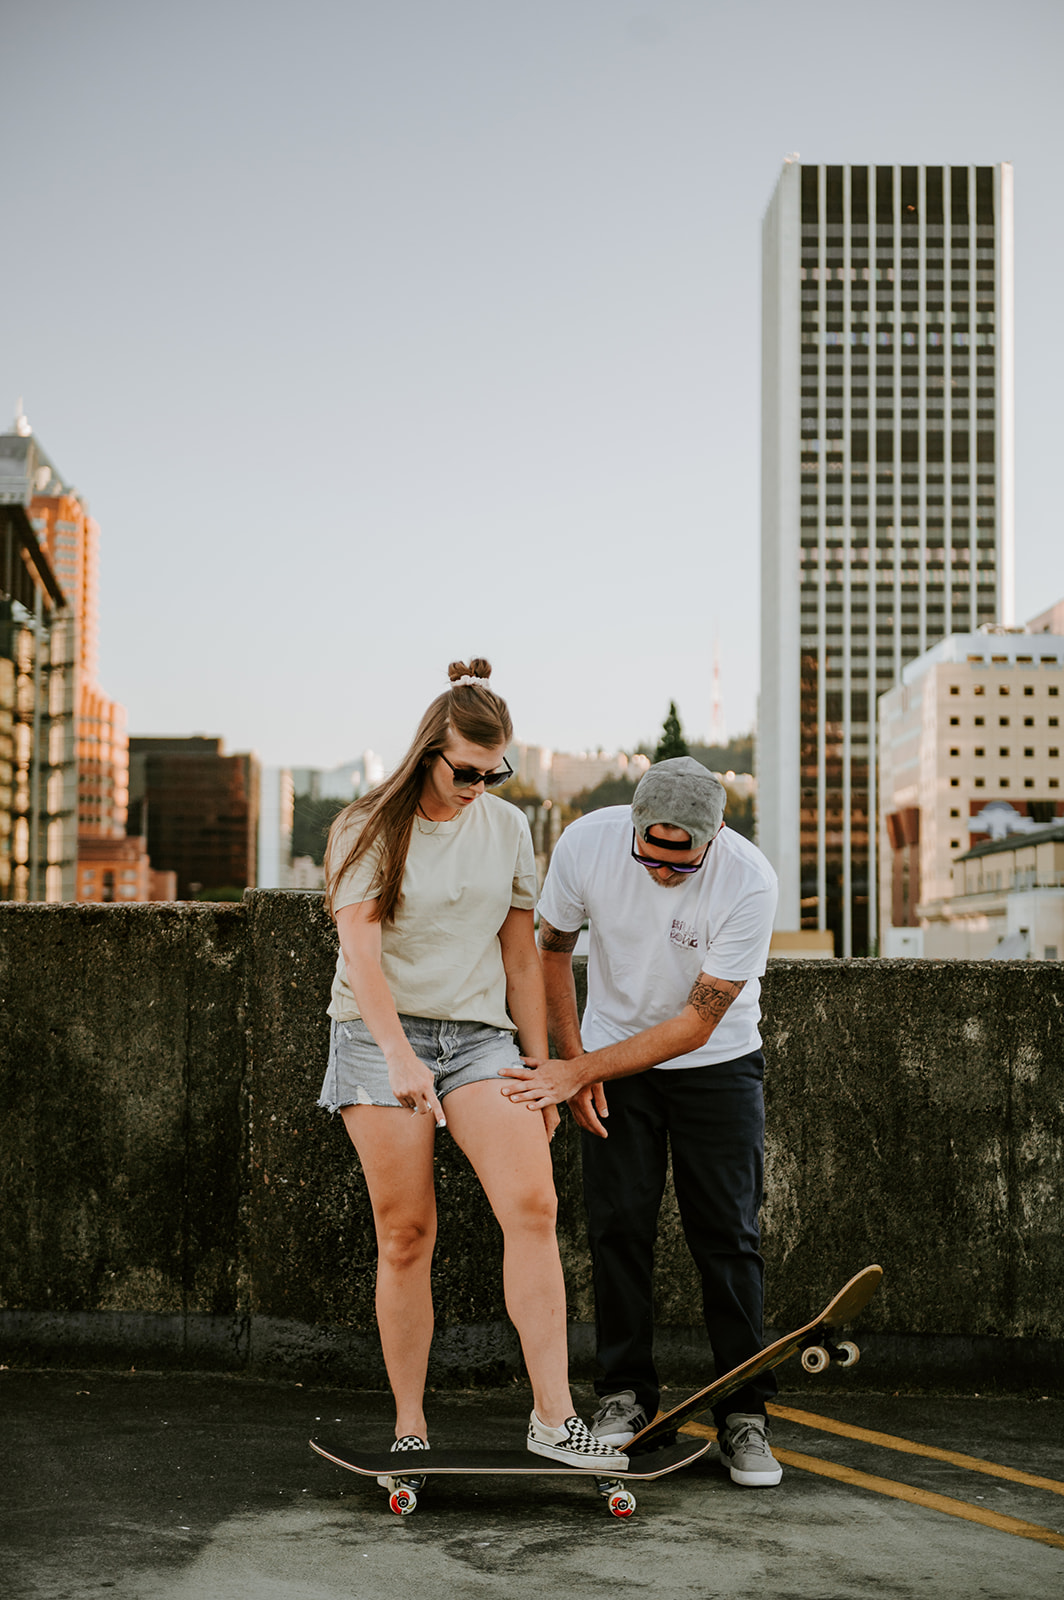 Guy teaching girl how to skateboard engagement session downtown portland